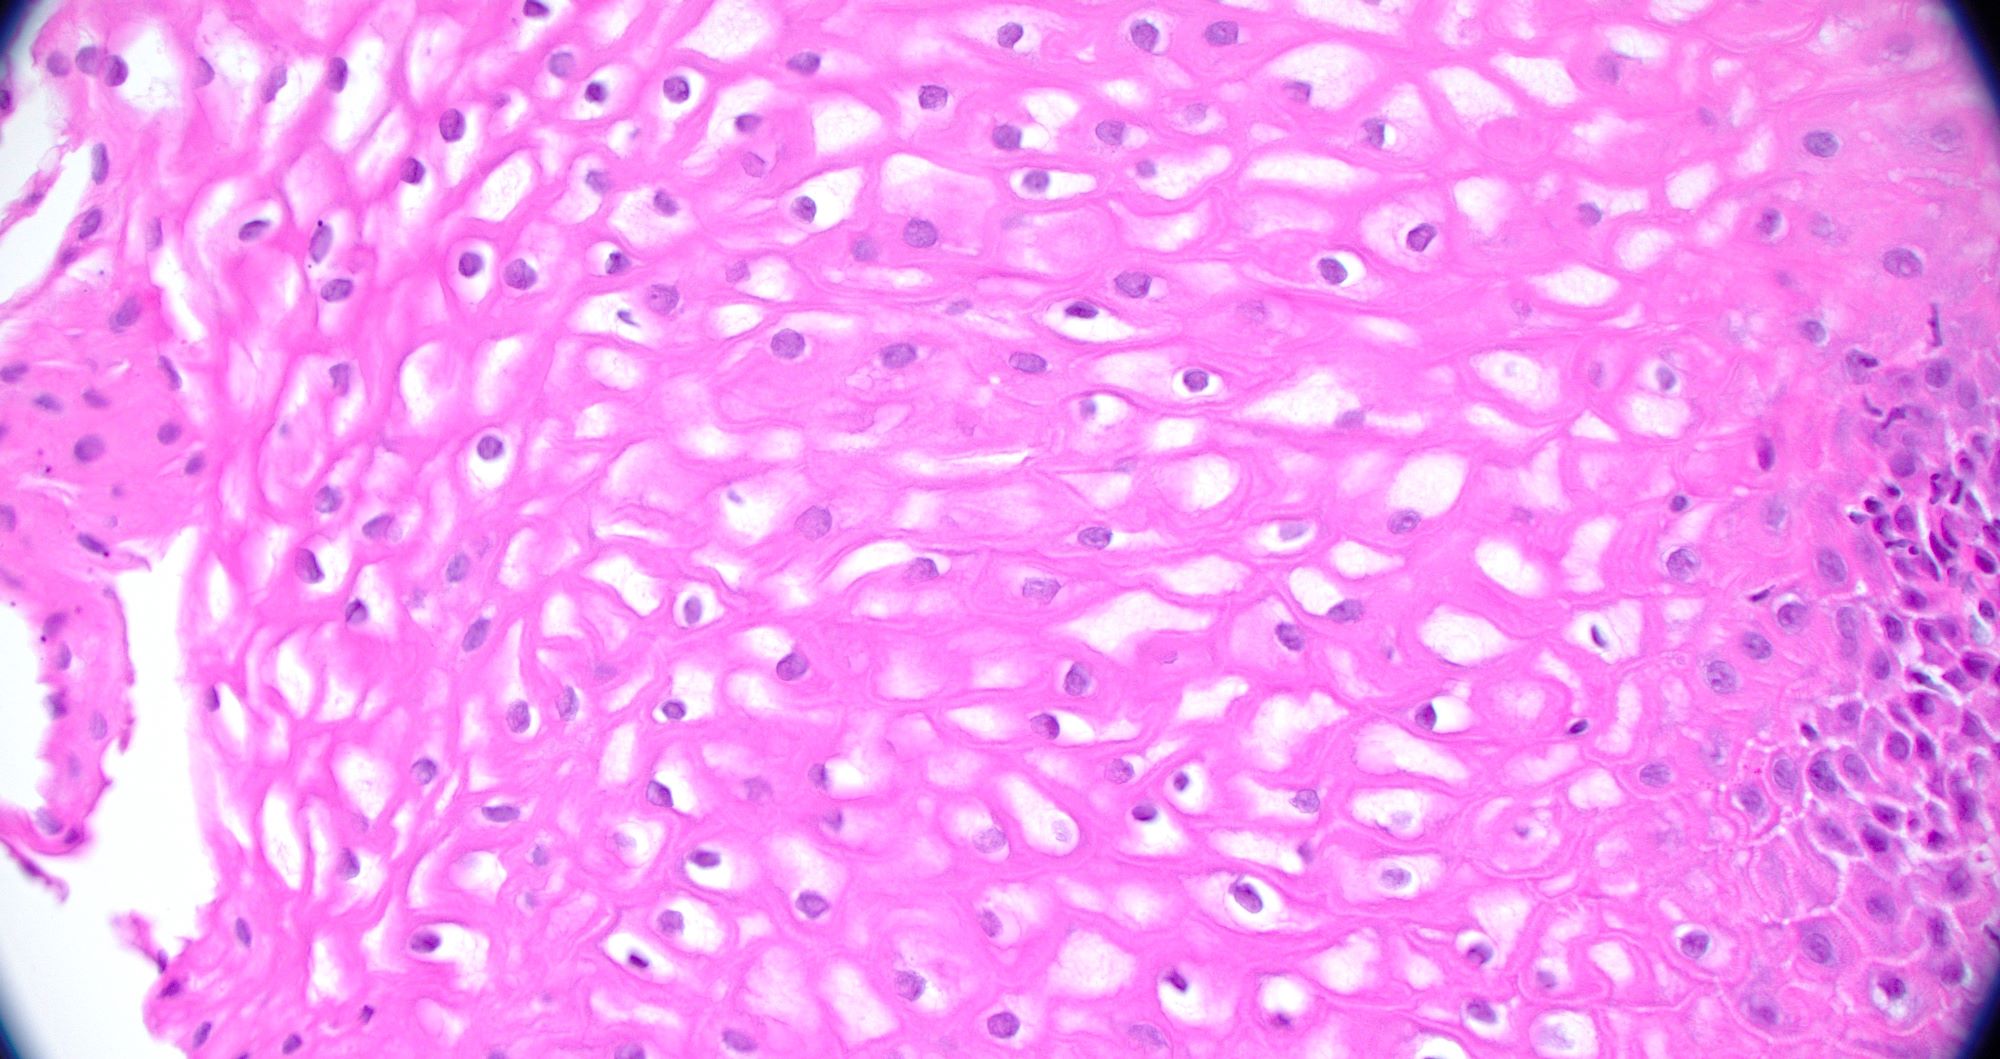 Clear cytoplasm of squamous epithelial cells